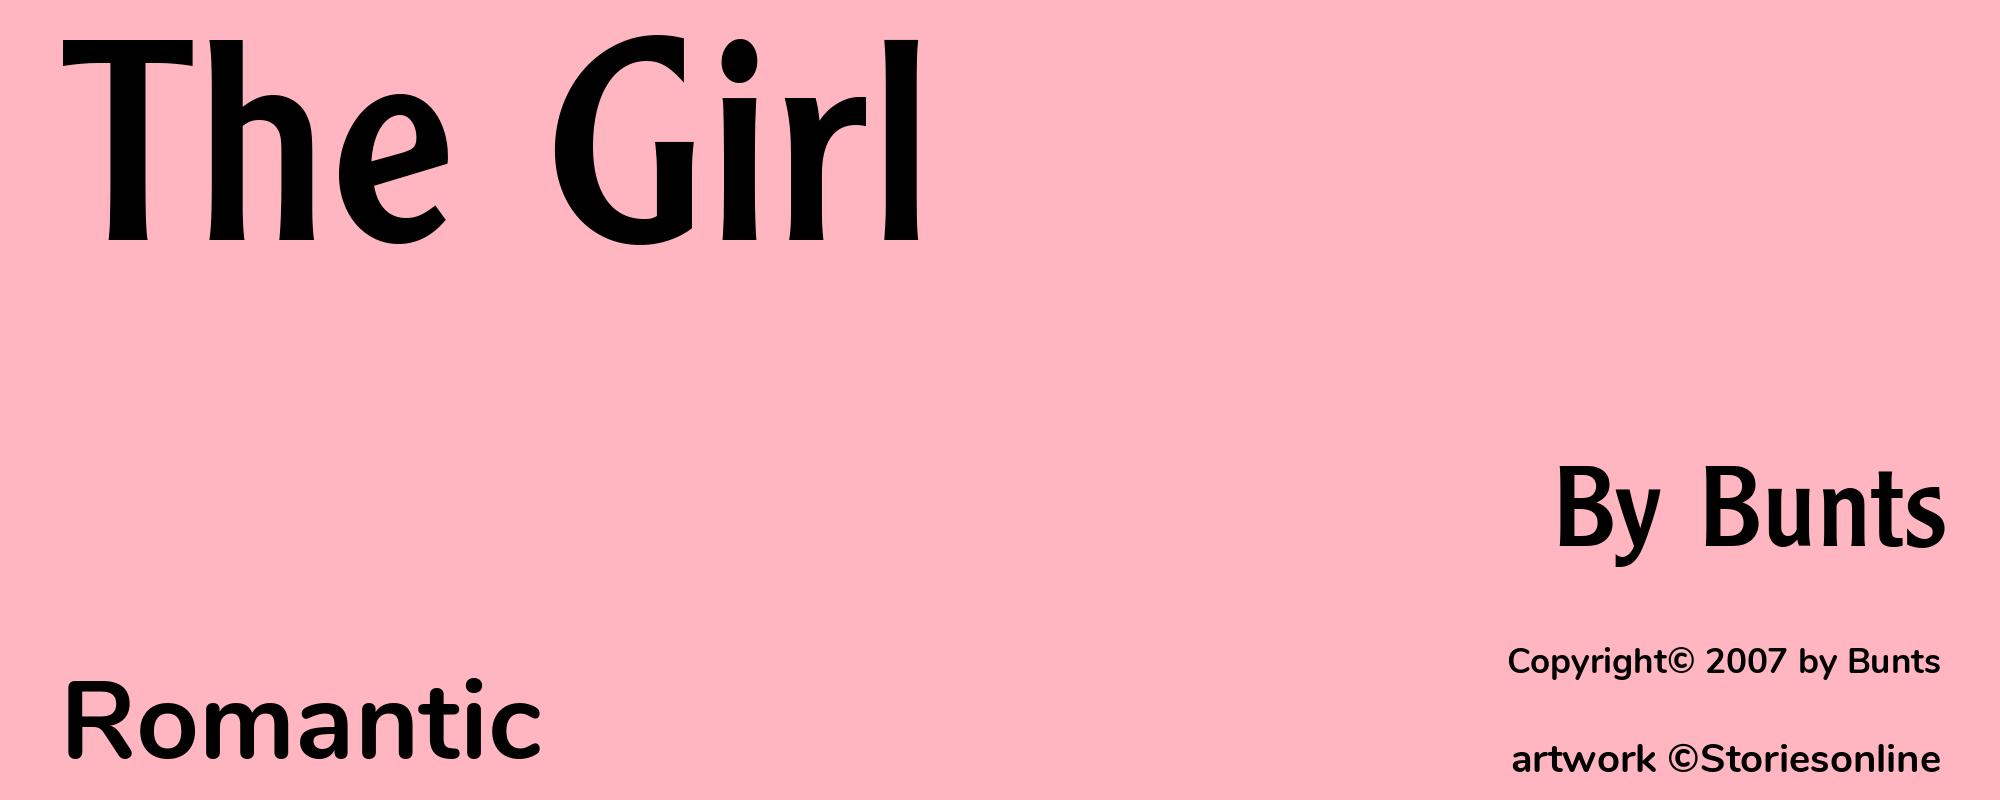 The Girl - Cover